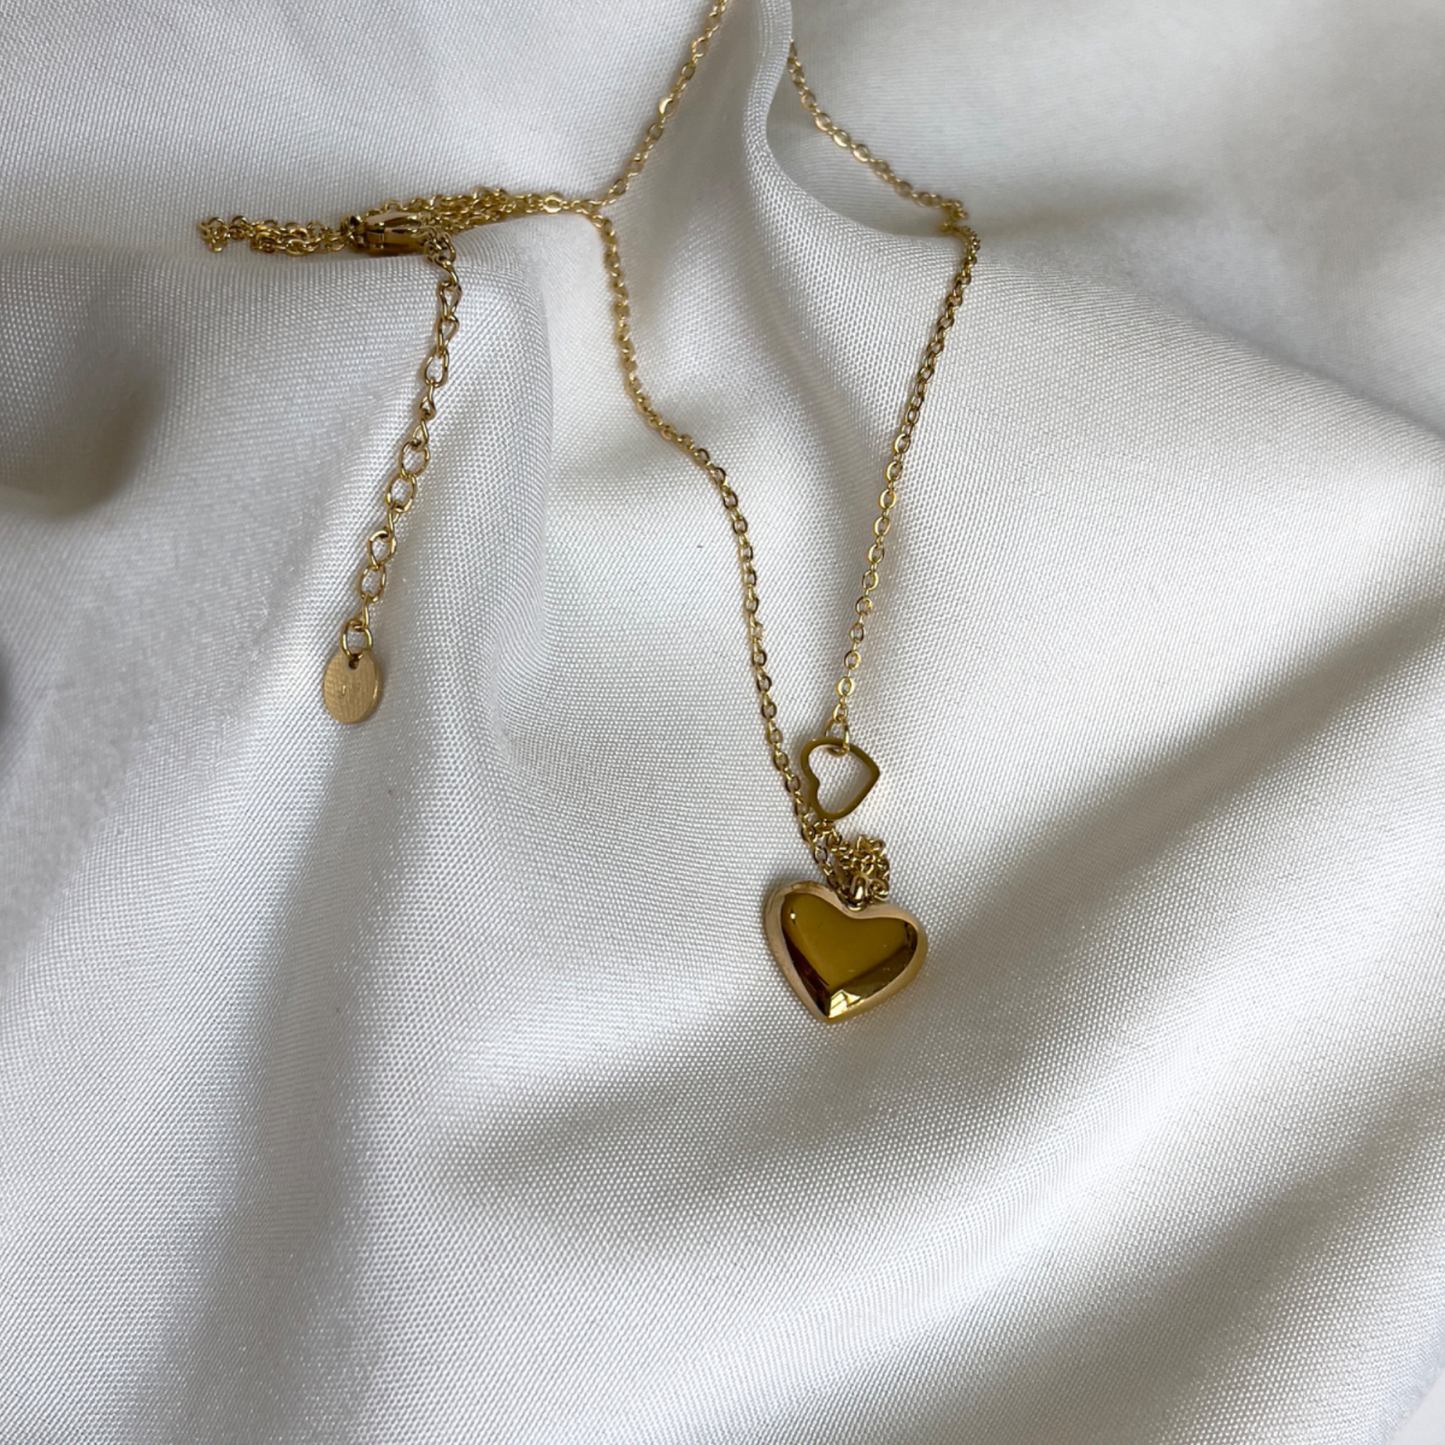 The 2in1 Golden Heart Necklace